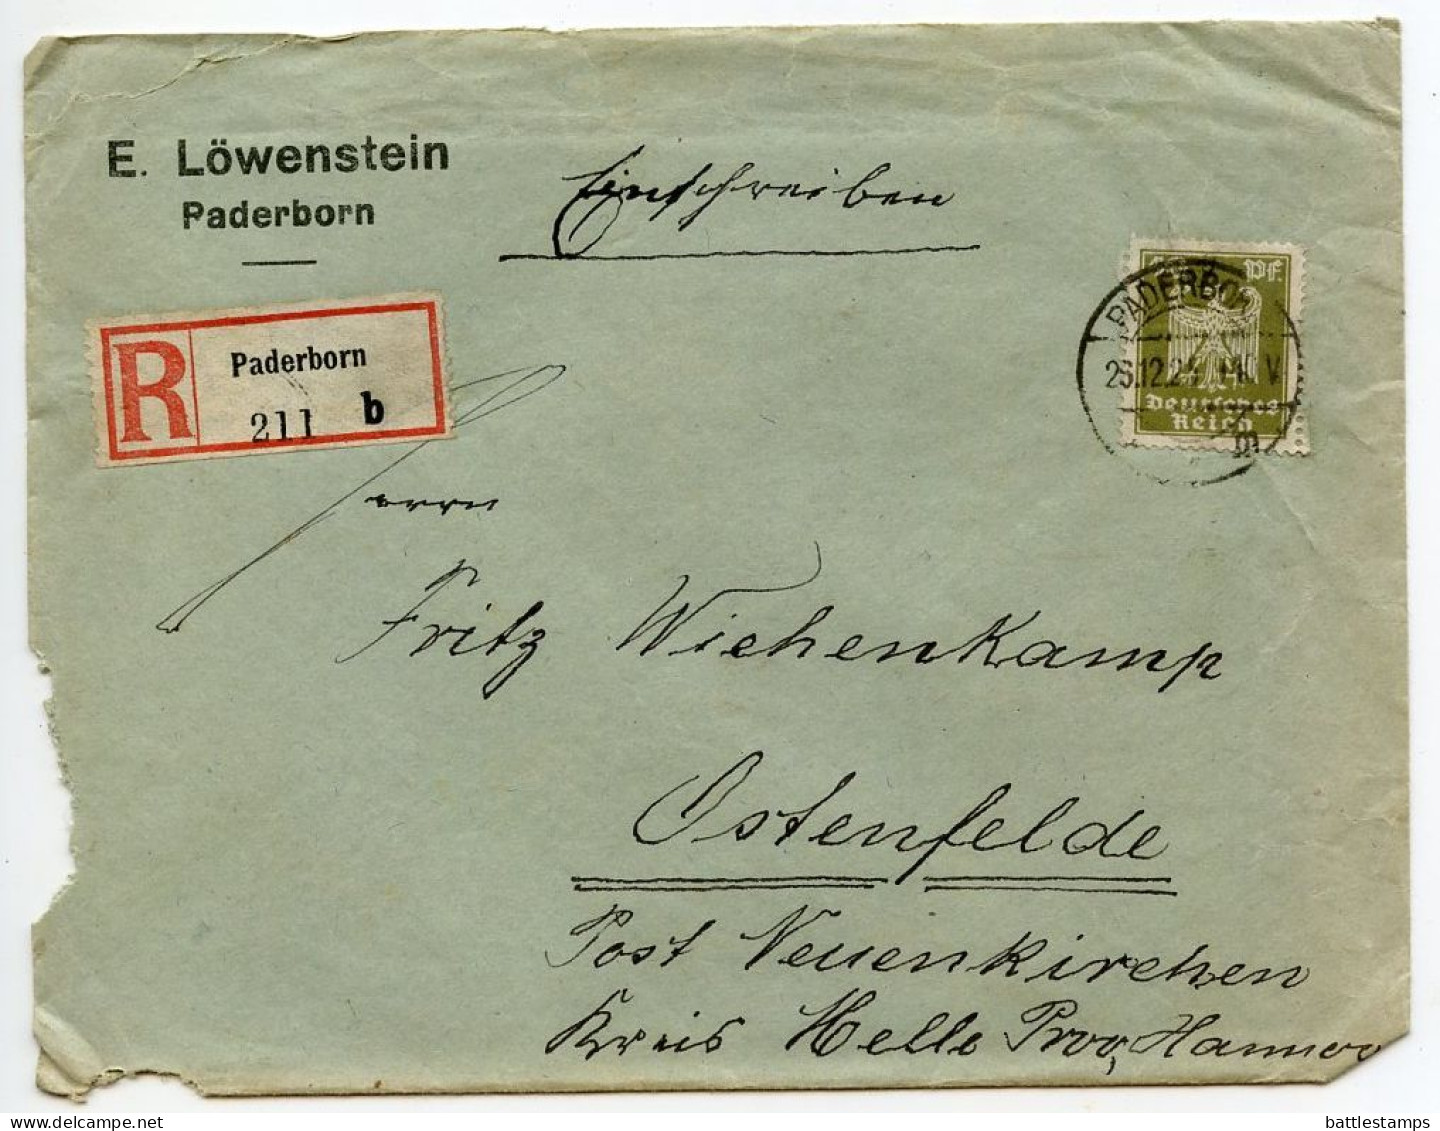 Germany 1925 Registered Cover & Mitteilung; Paderborn To Ostenfelde; 40pf. German Eagle - Covers & Documents